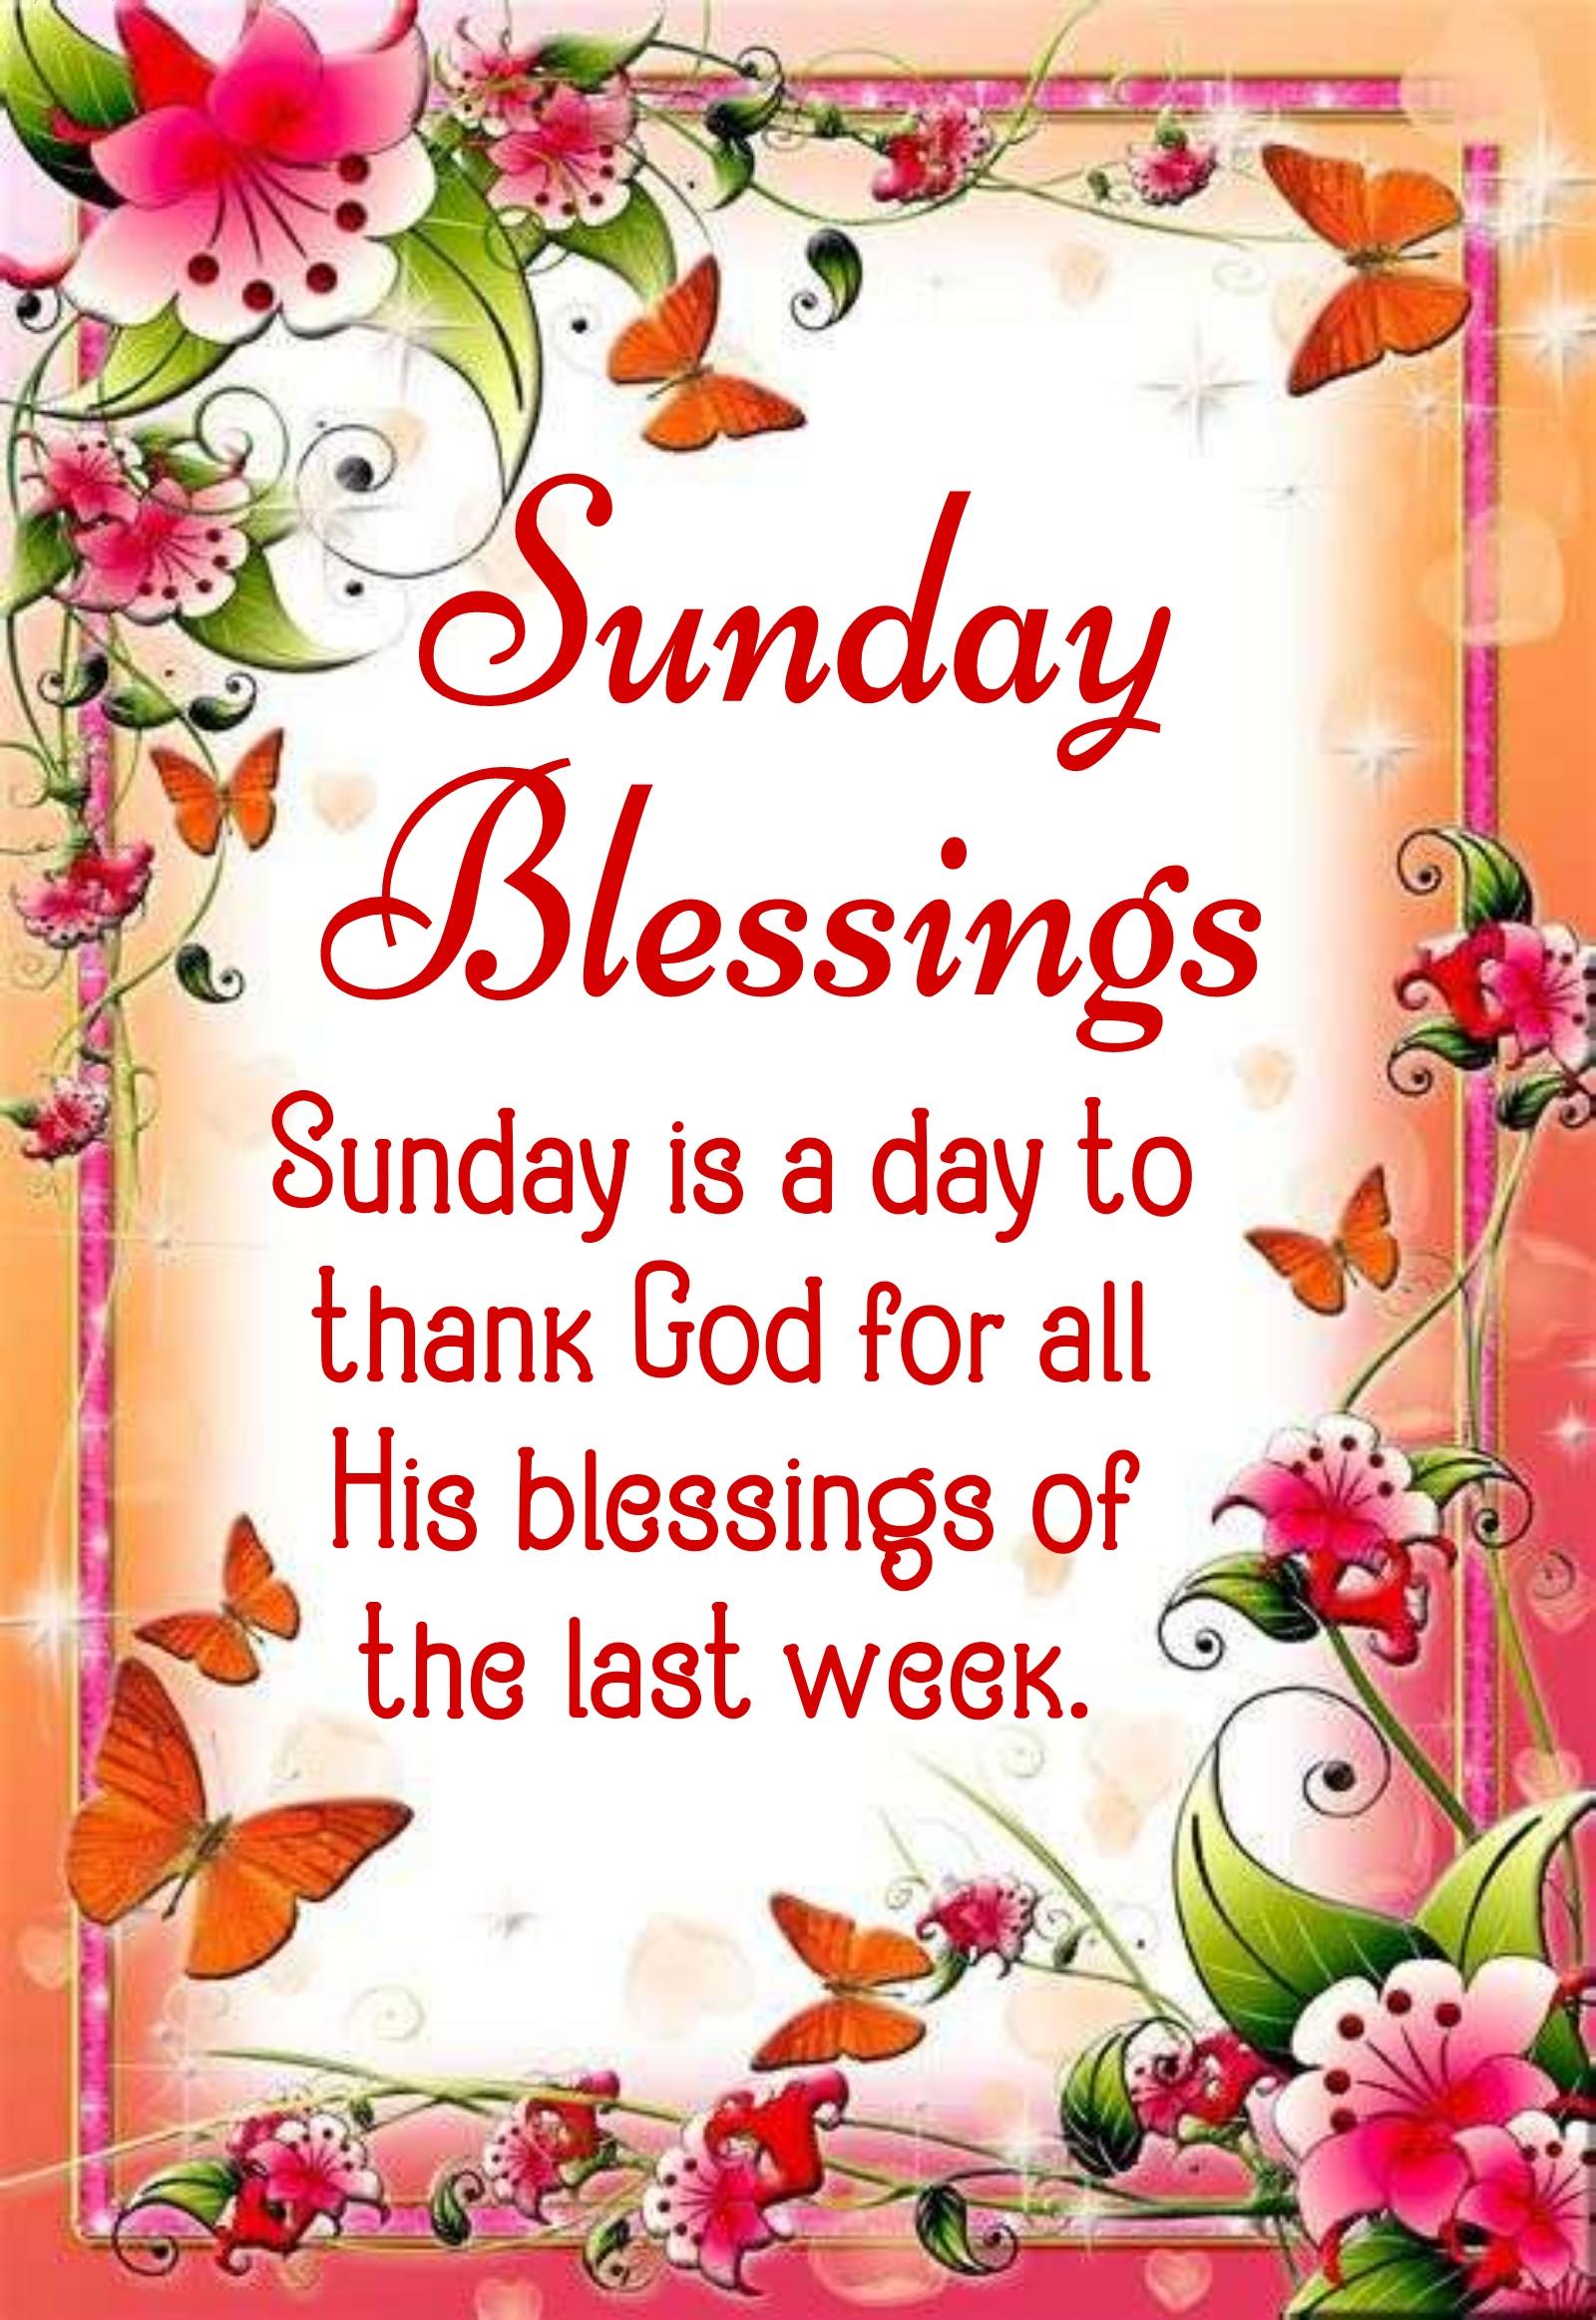 Sunday is a day to thank God for all His blessings of the last week